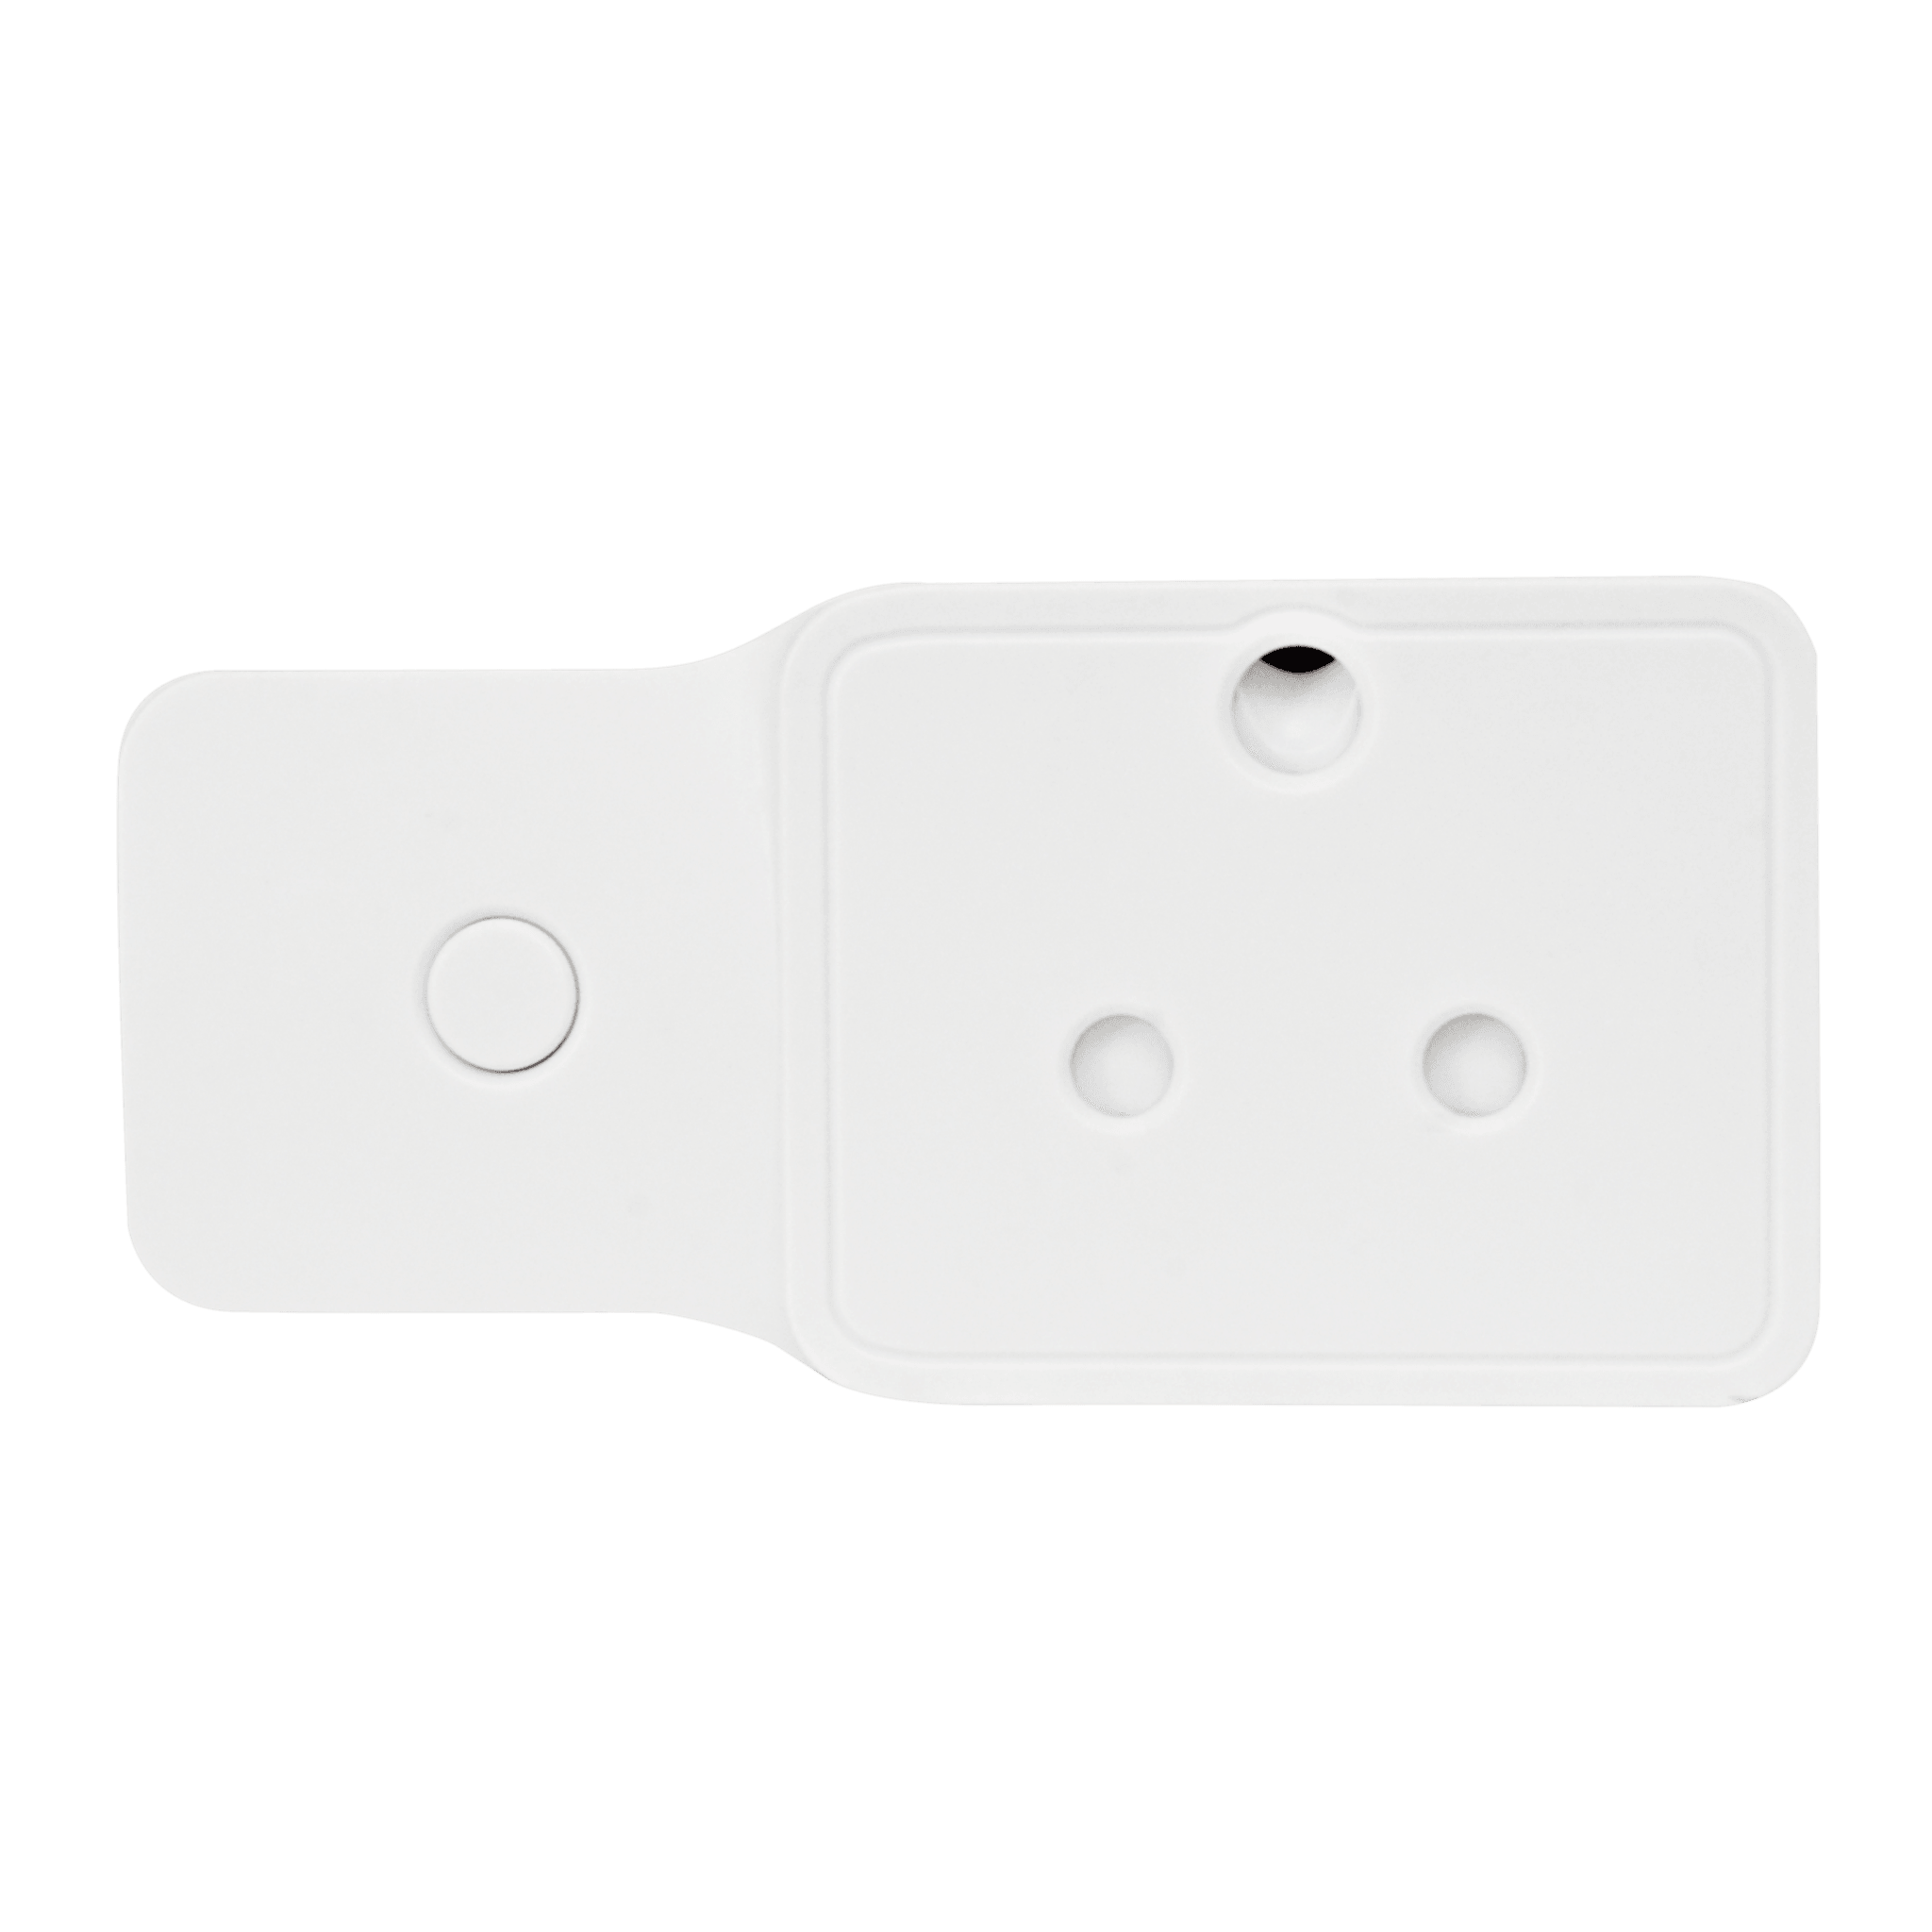 Z-Wave Smart Home Monitoring Kit - IOTREND